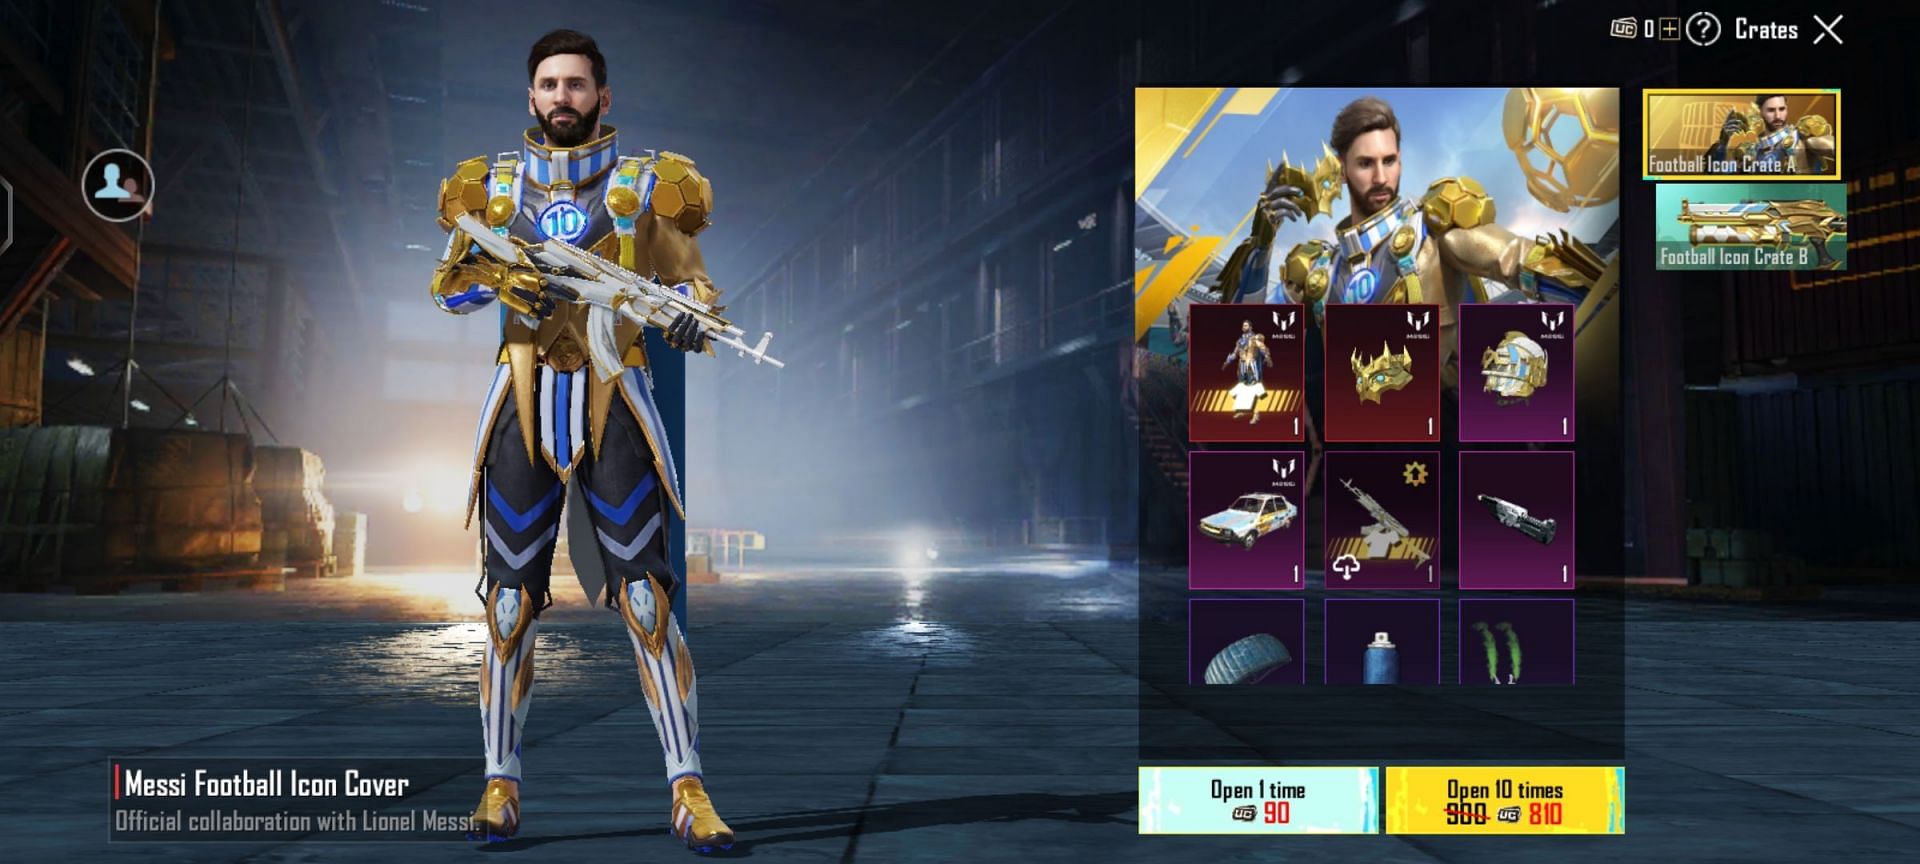 Messi Football Icon Set and other themed collectibles (Image via Tencent Games)